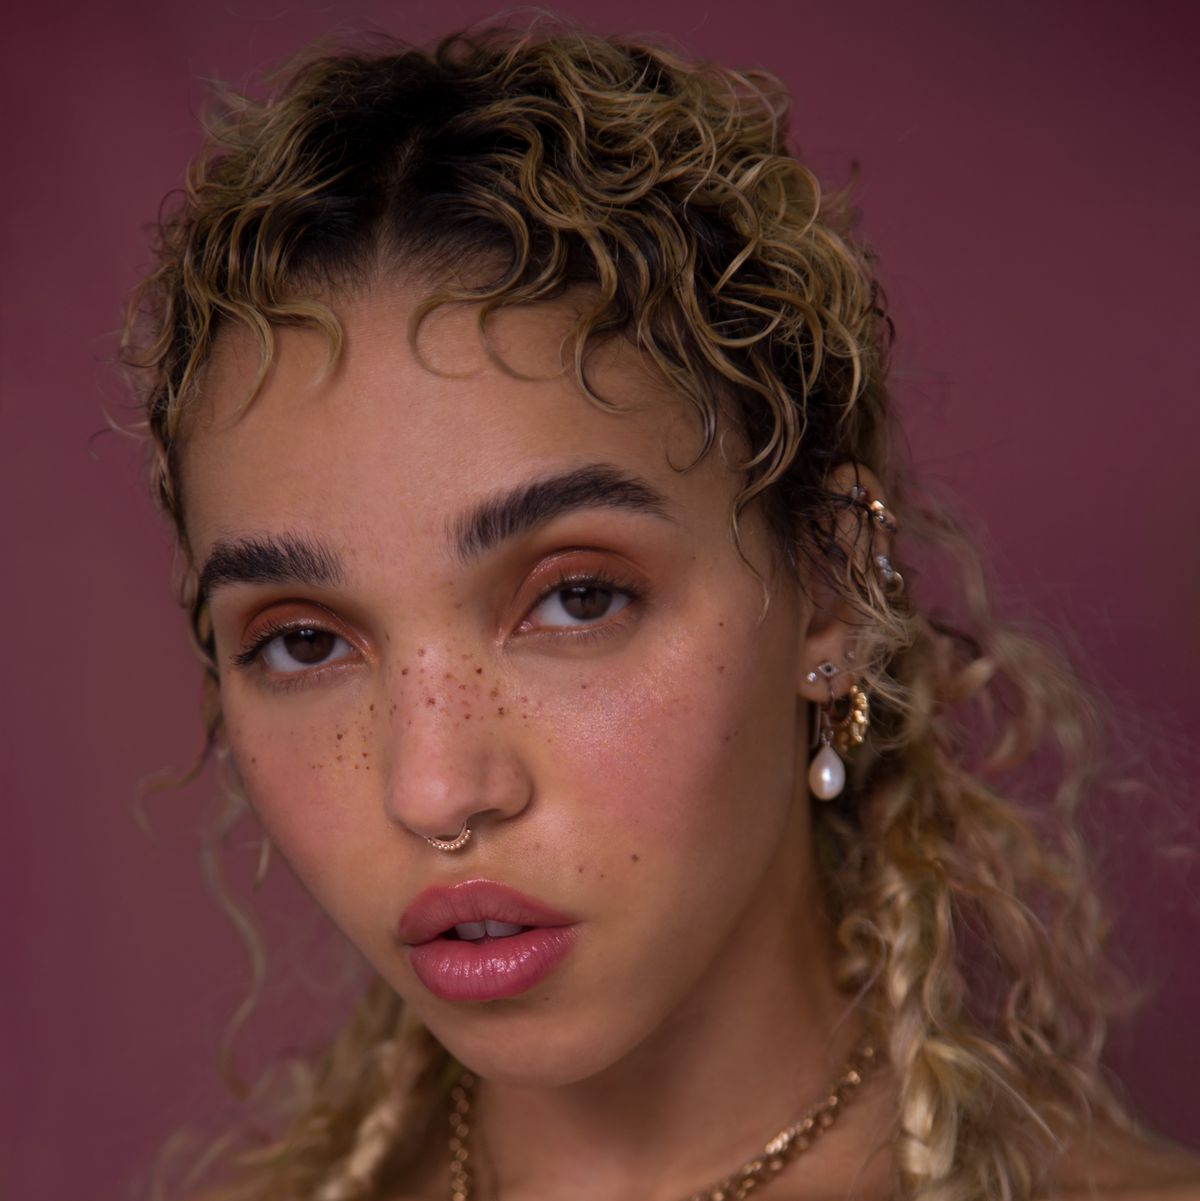 FKA Twigs on Her Abusive Relationship With Shia LaBeouf